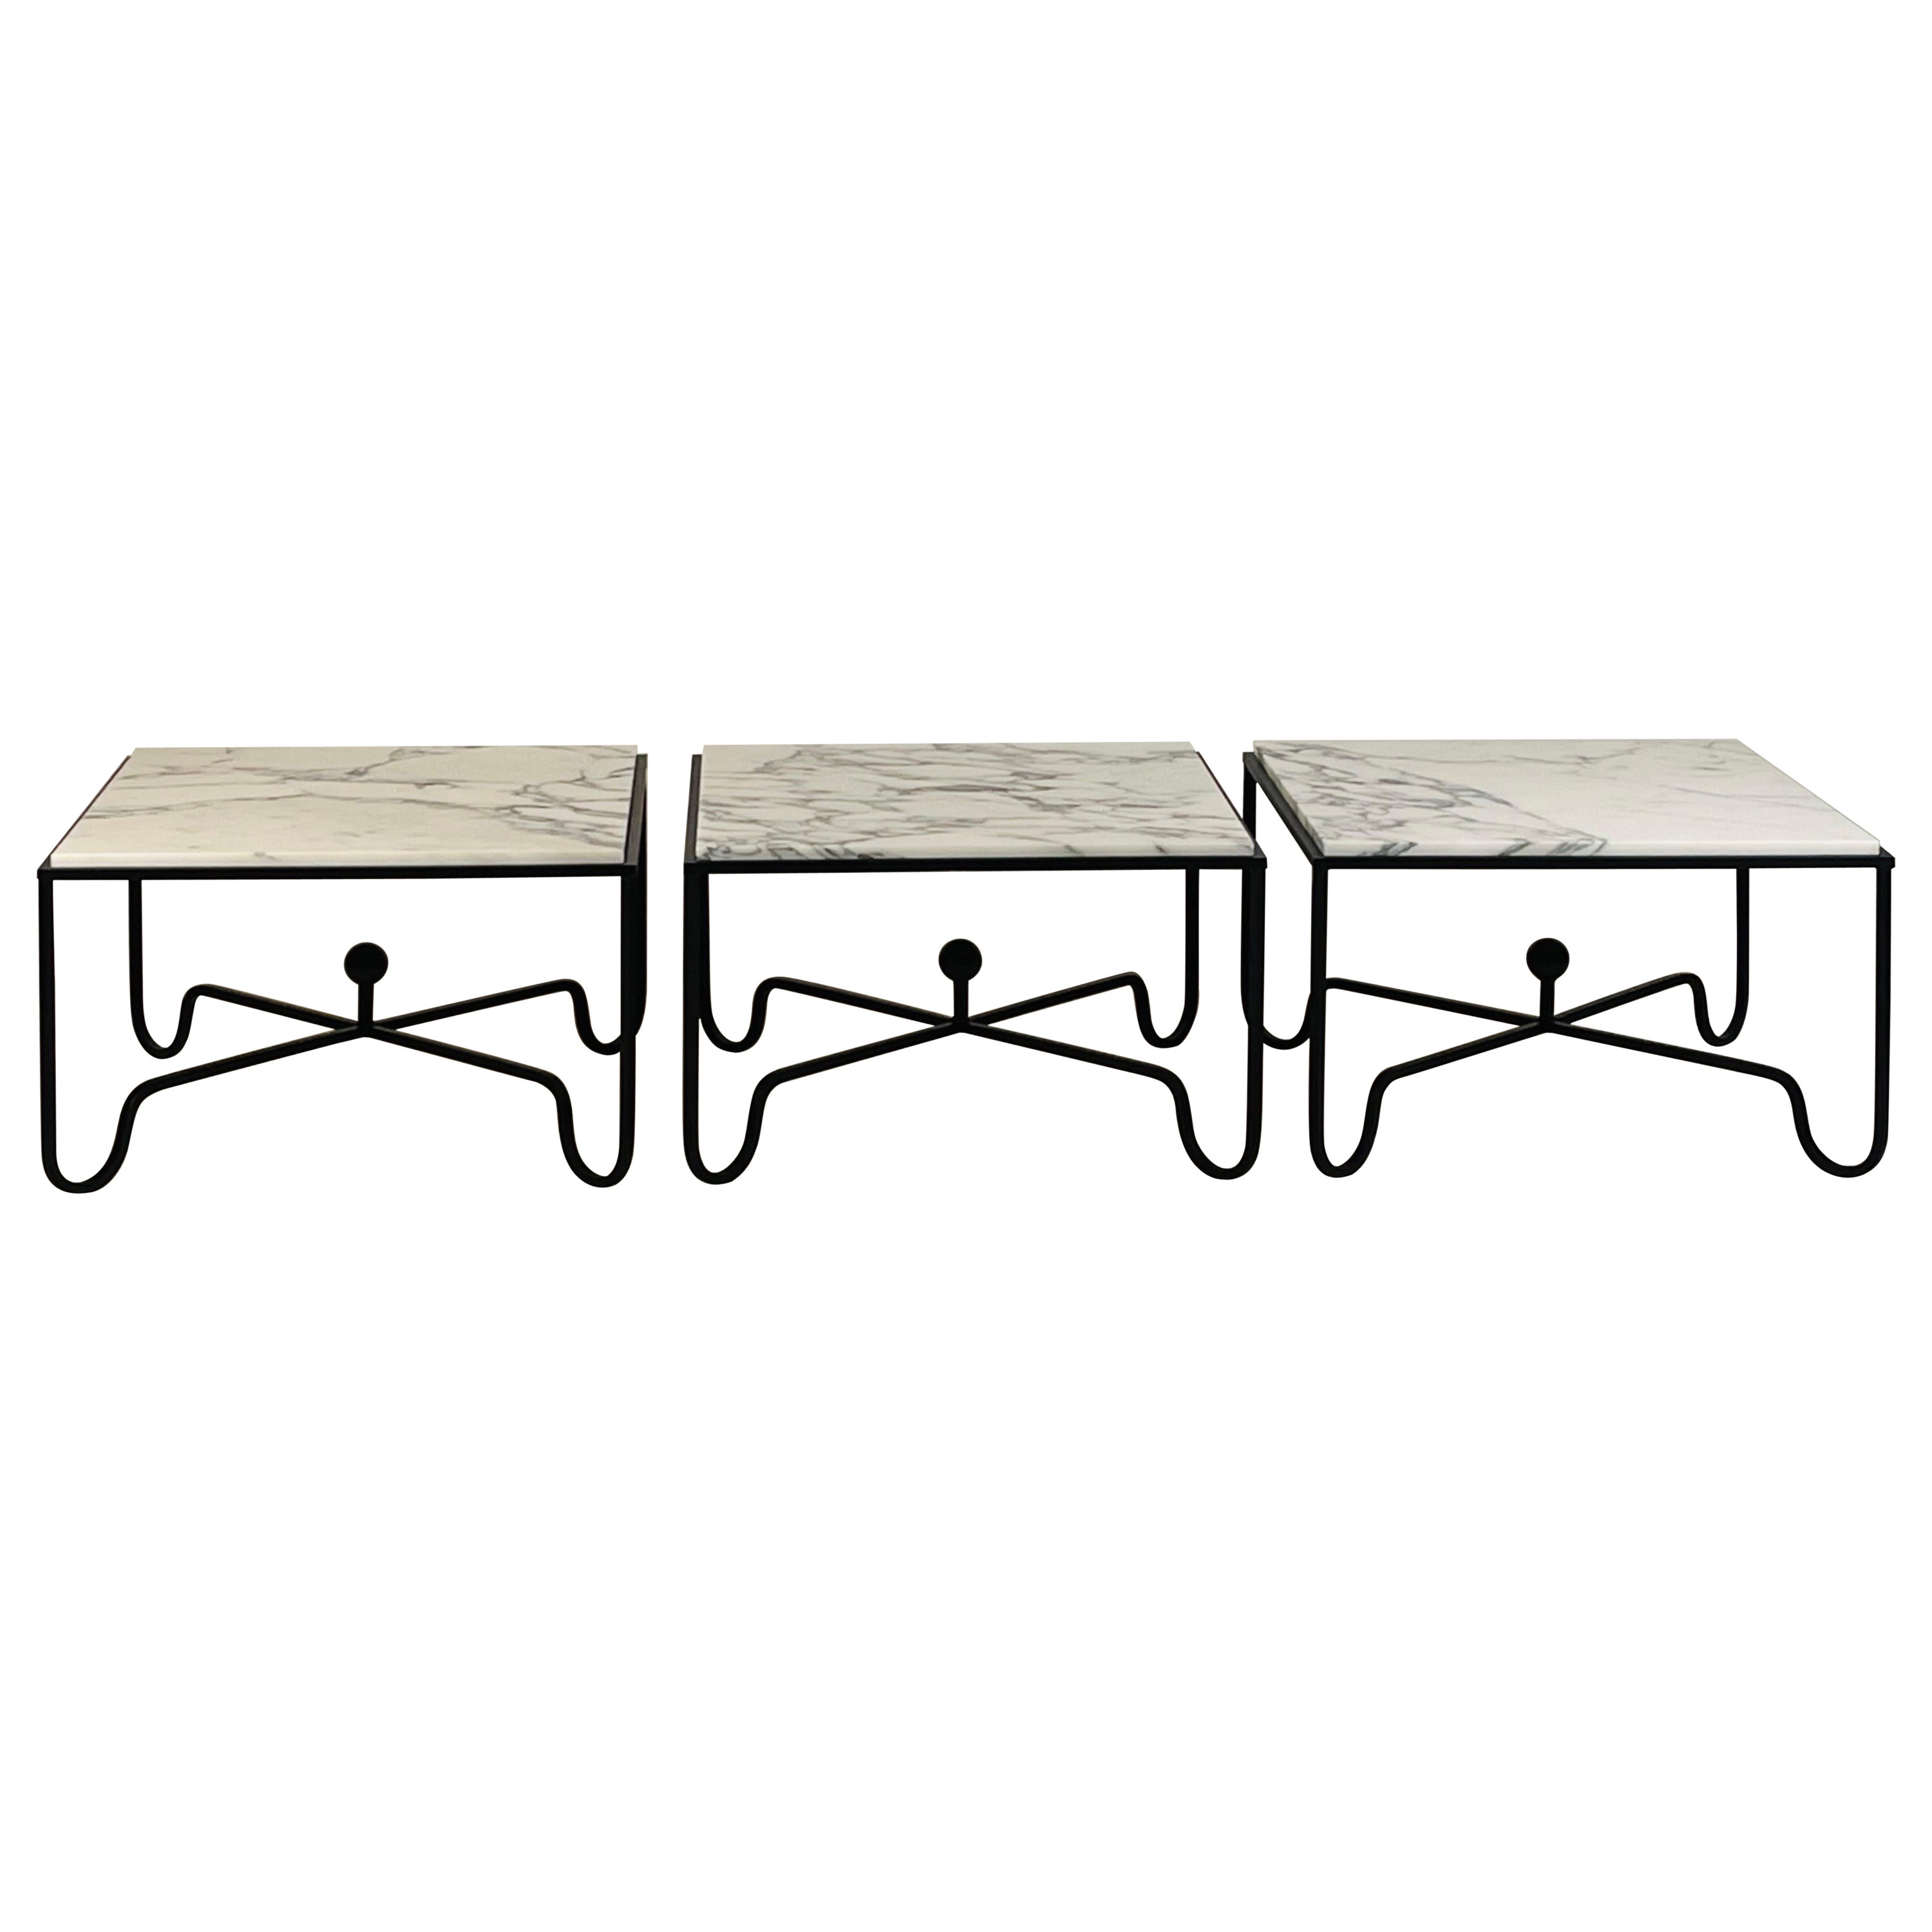 Chic 3-Part Arabescato Marble 'Entretoise' Coffee Table by Design Frères For Sale